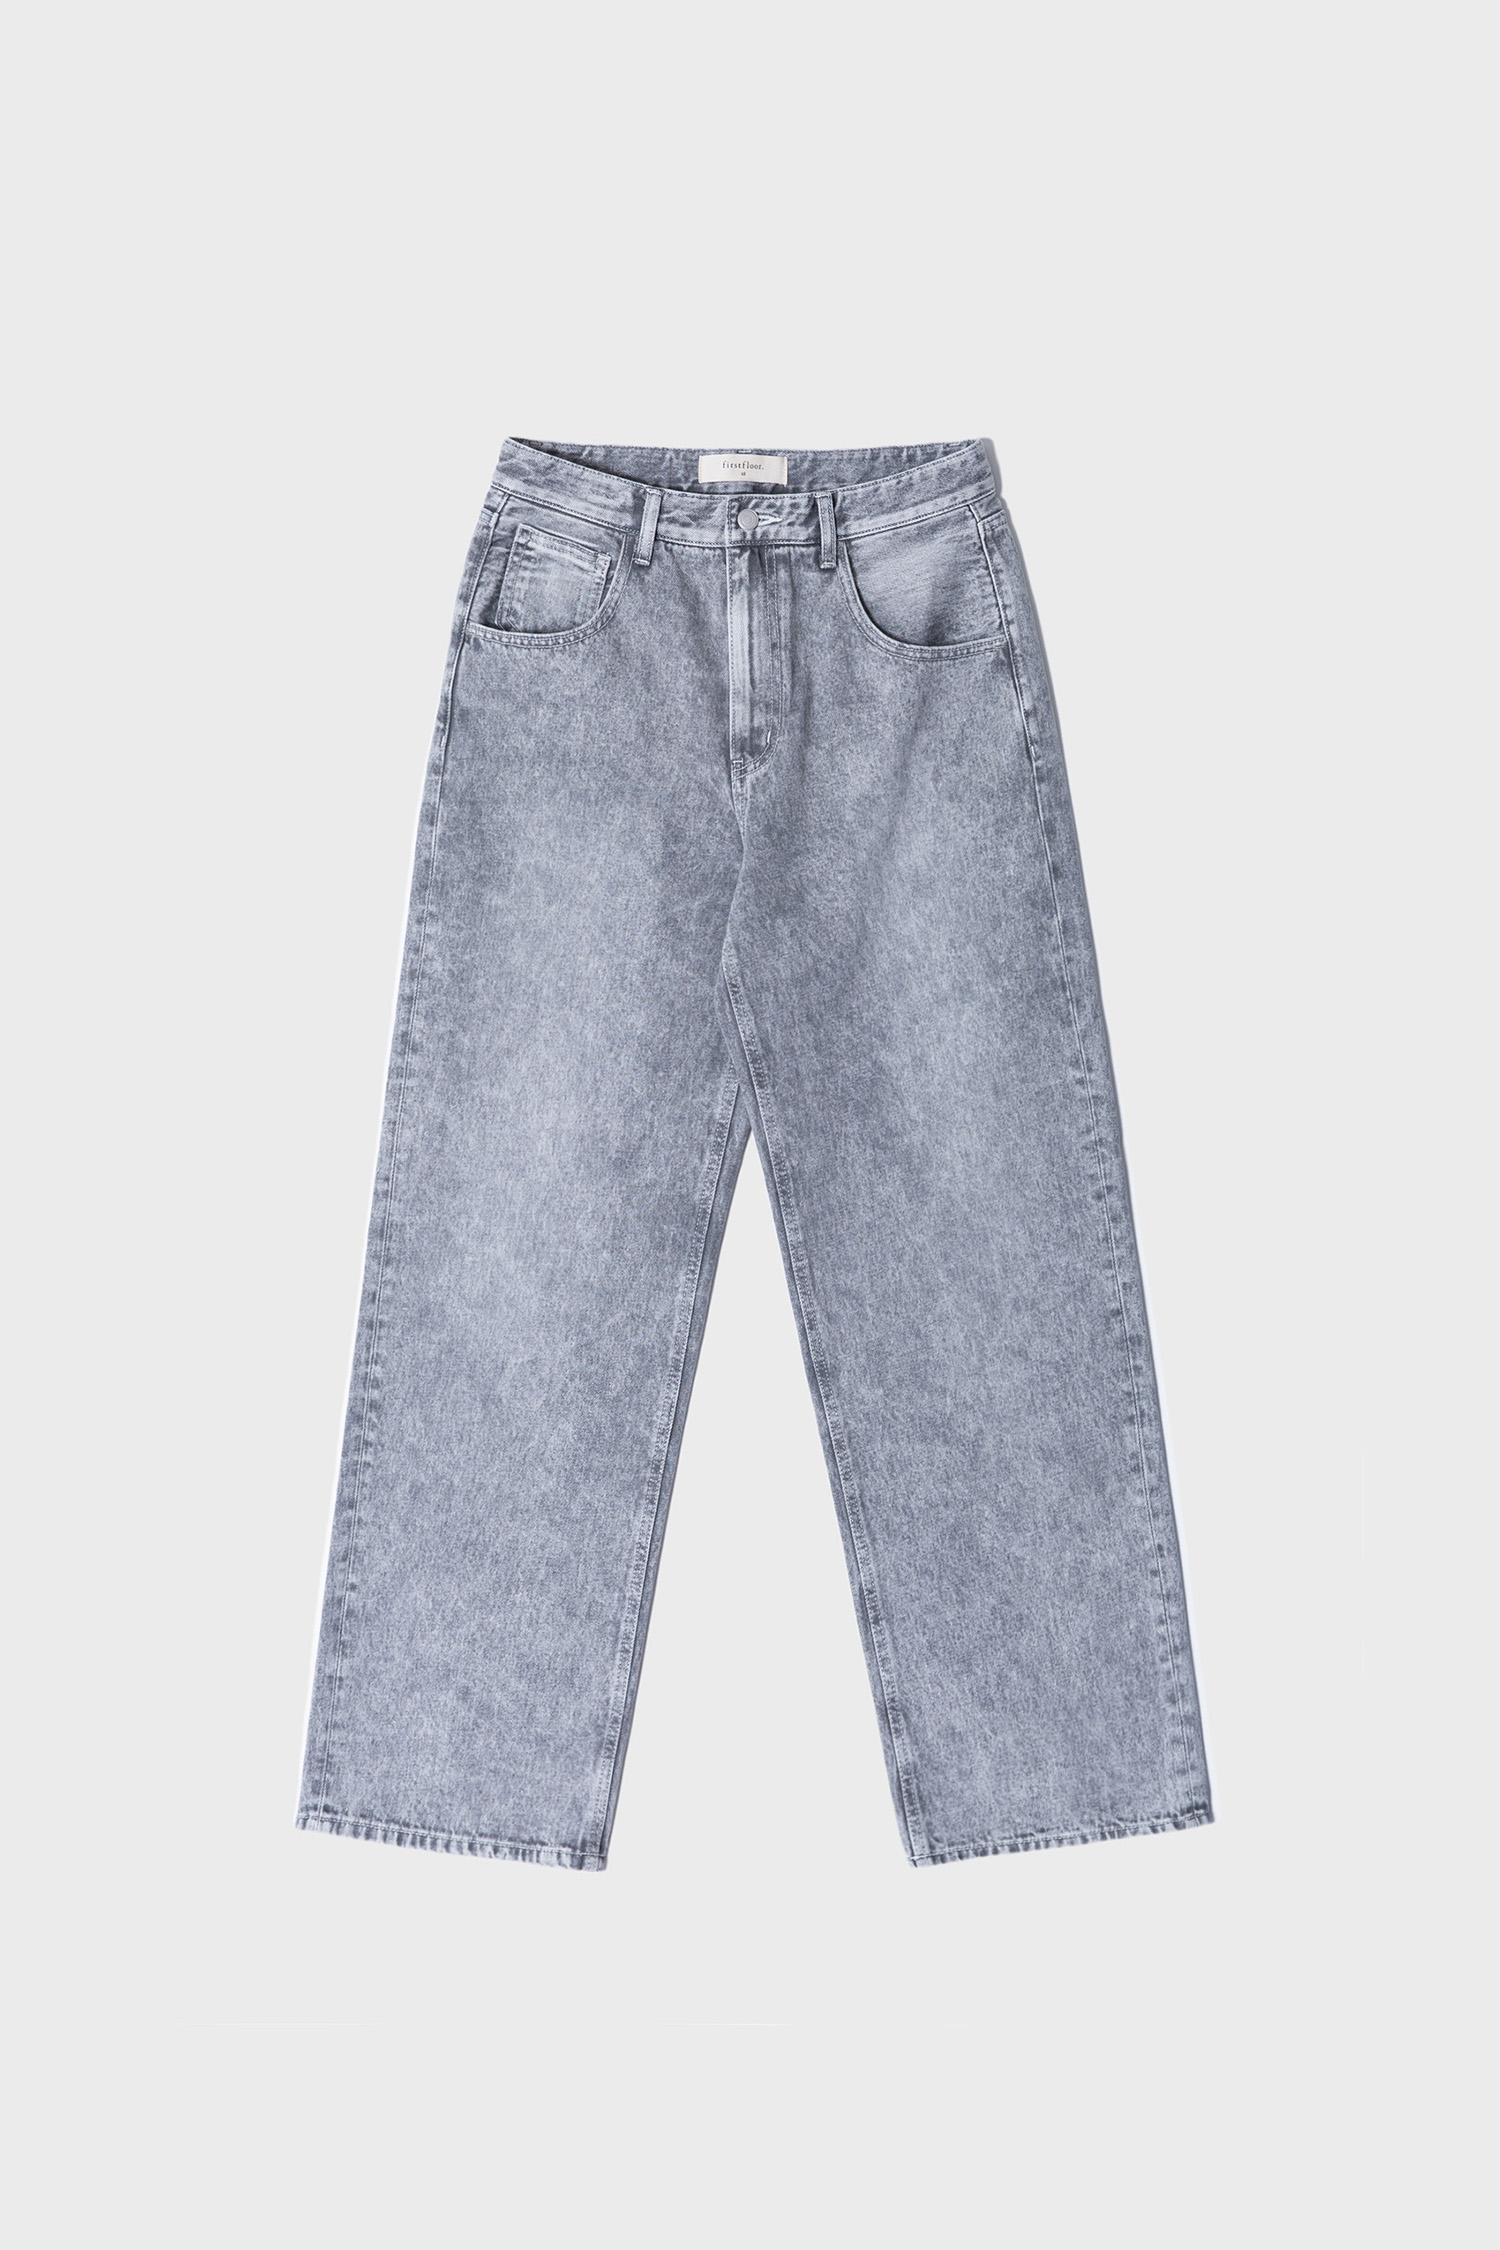 Wide tapered jeans (snowfield, gray ver.)